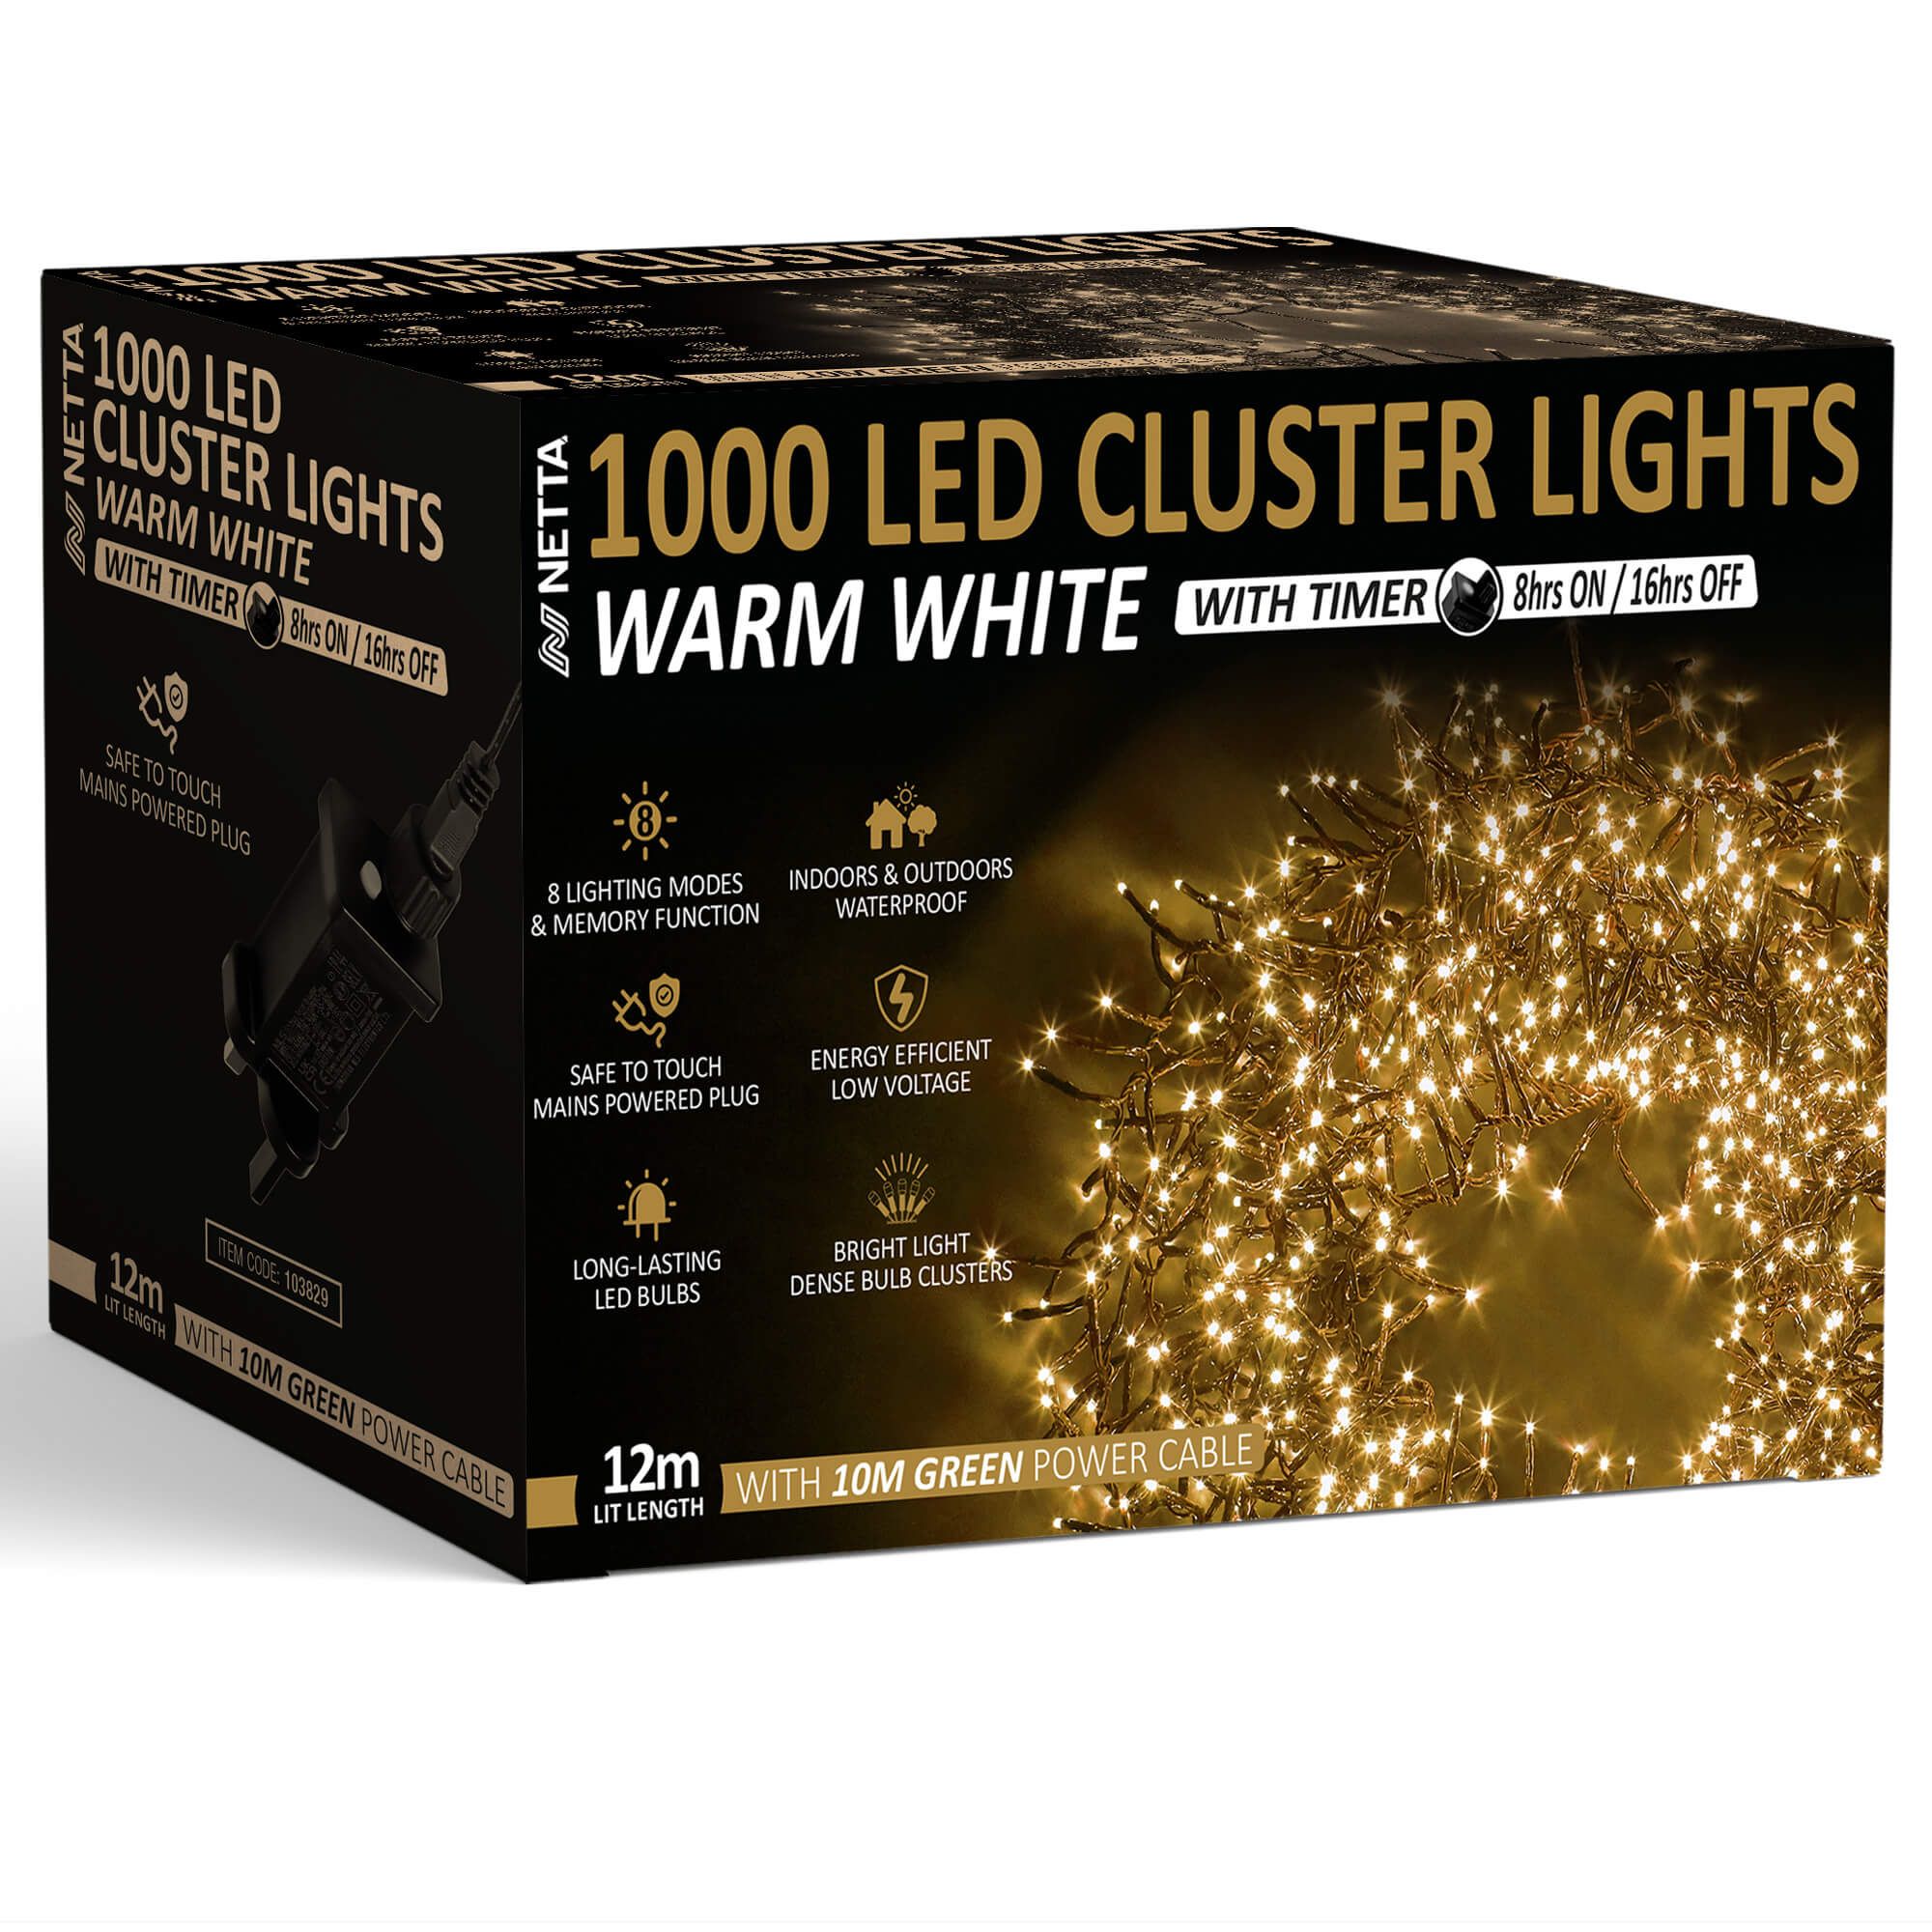 NETTA 1000 LED 12M Cluster String Lights Outdoor and Indoor Plug In - Warm White